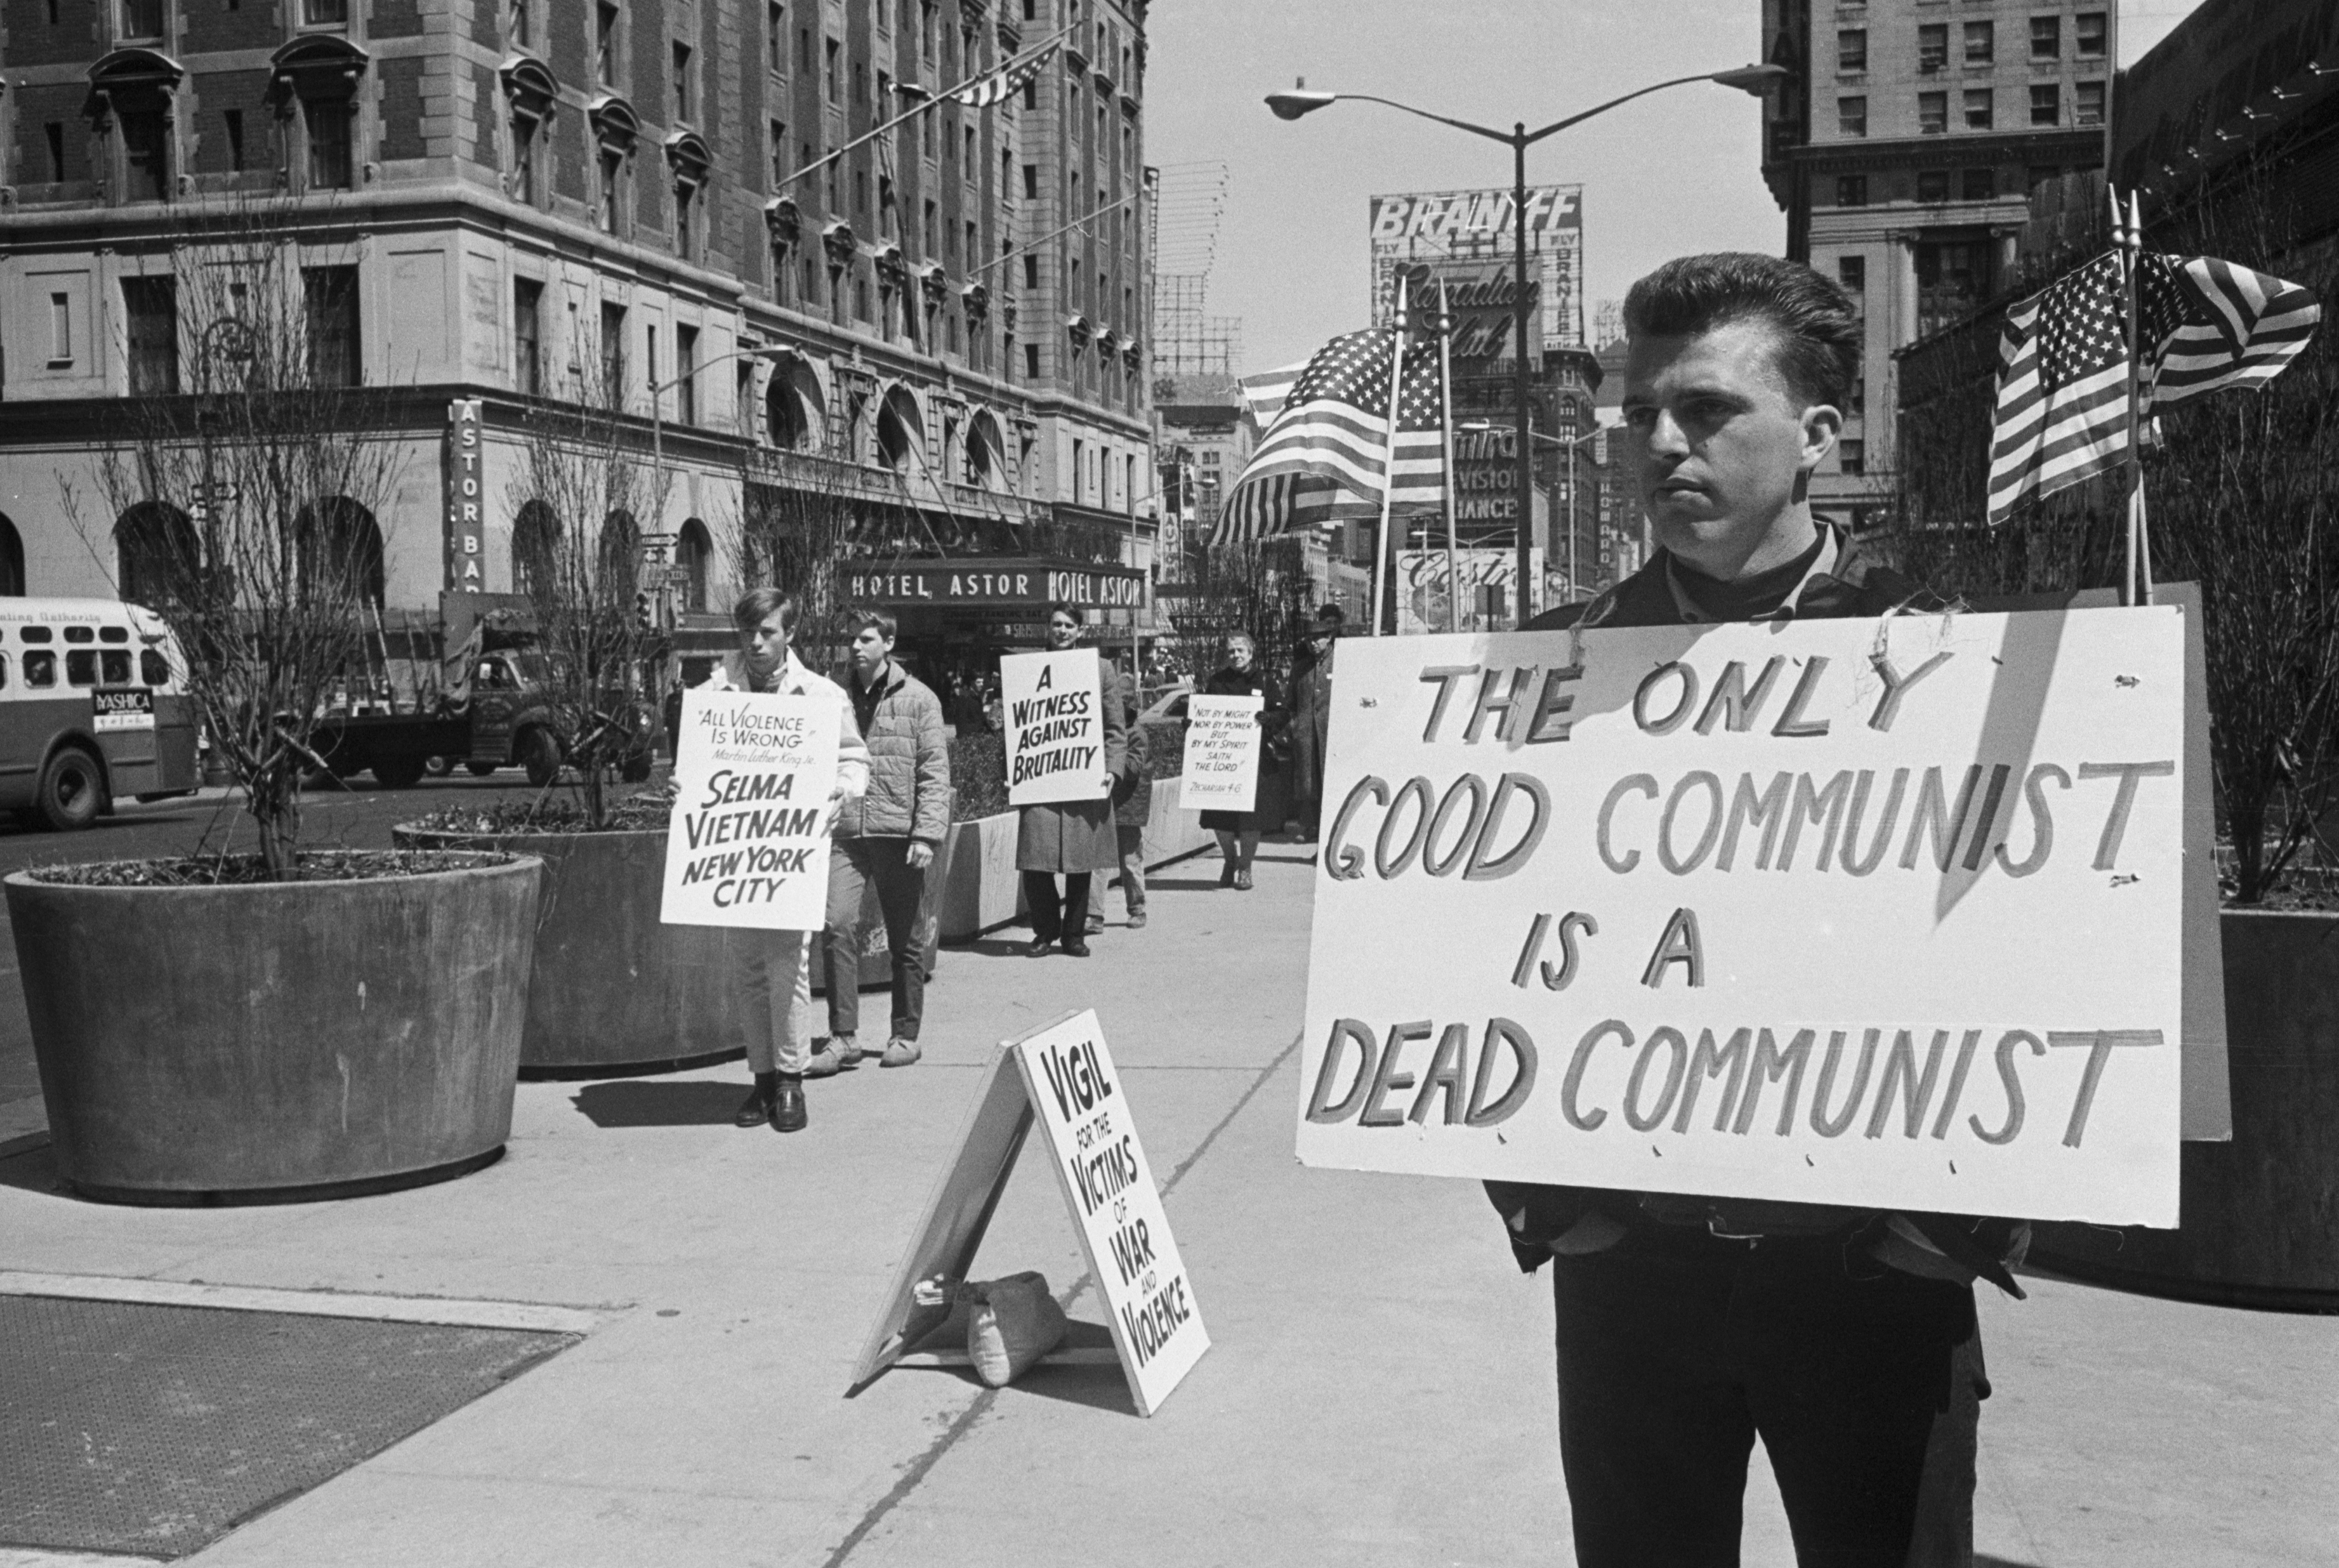 Antiwar protesters in 1965 stand to the left of a counter-demonstrator with a sign reading "The Only Good Communist is a Dead Communist."